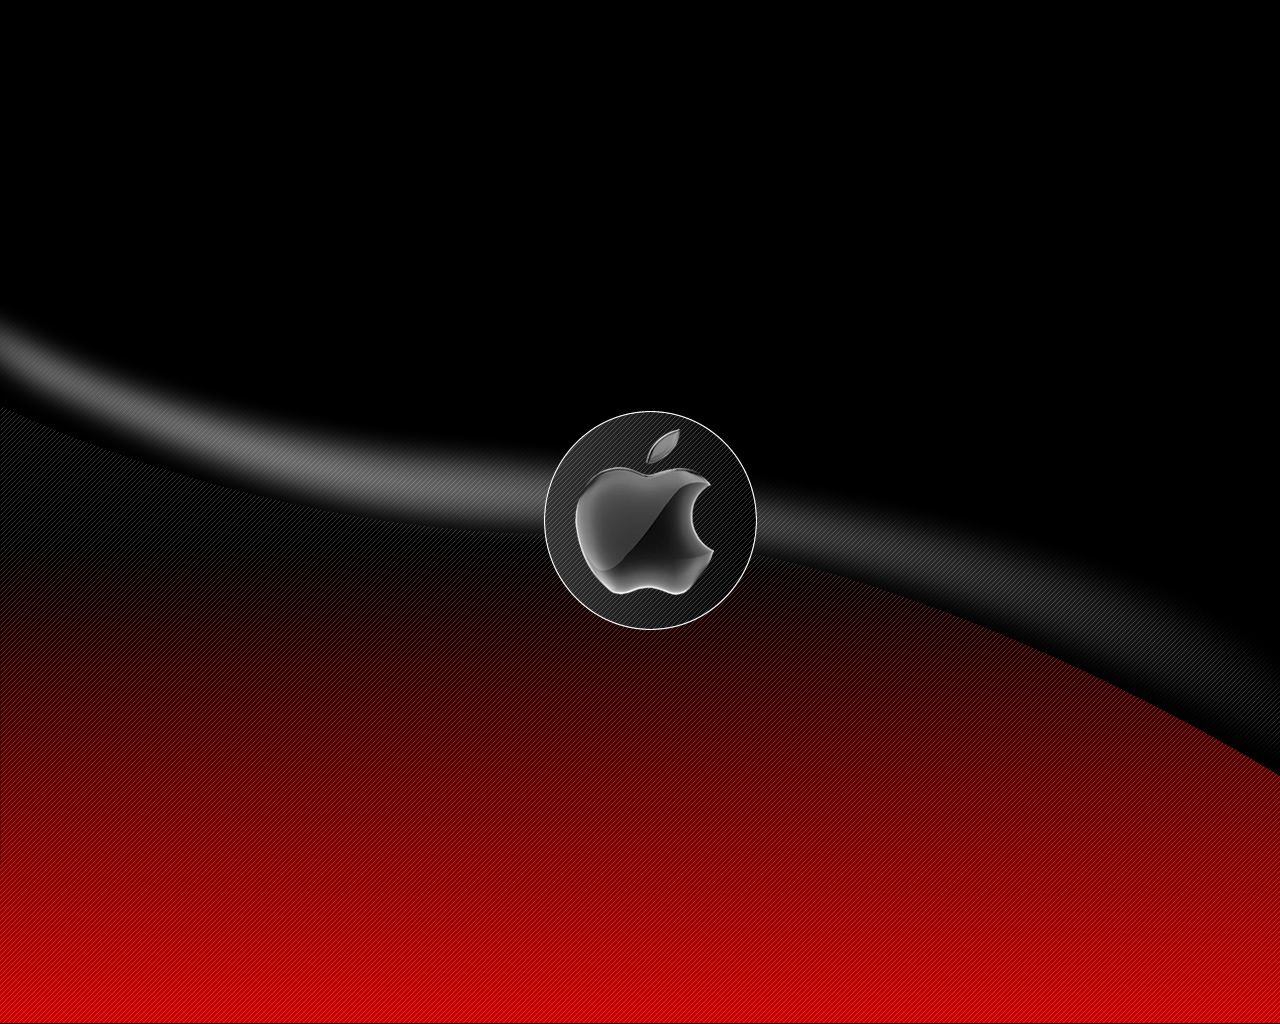 Black And Red Apple Mac Wallpaper For Android Wallpaper